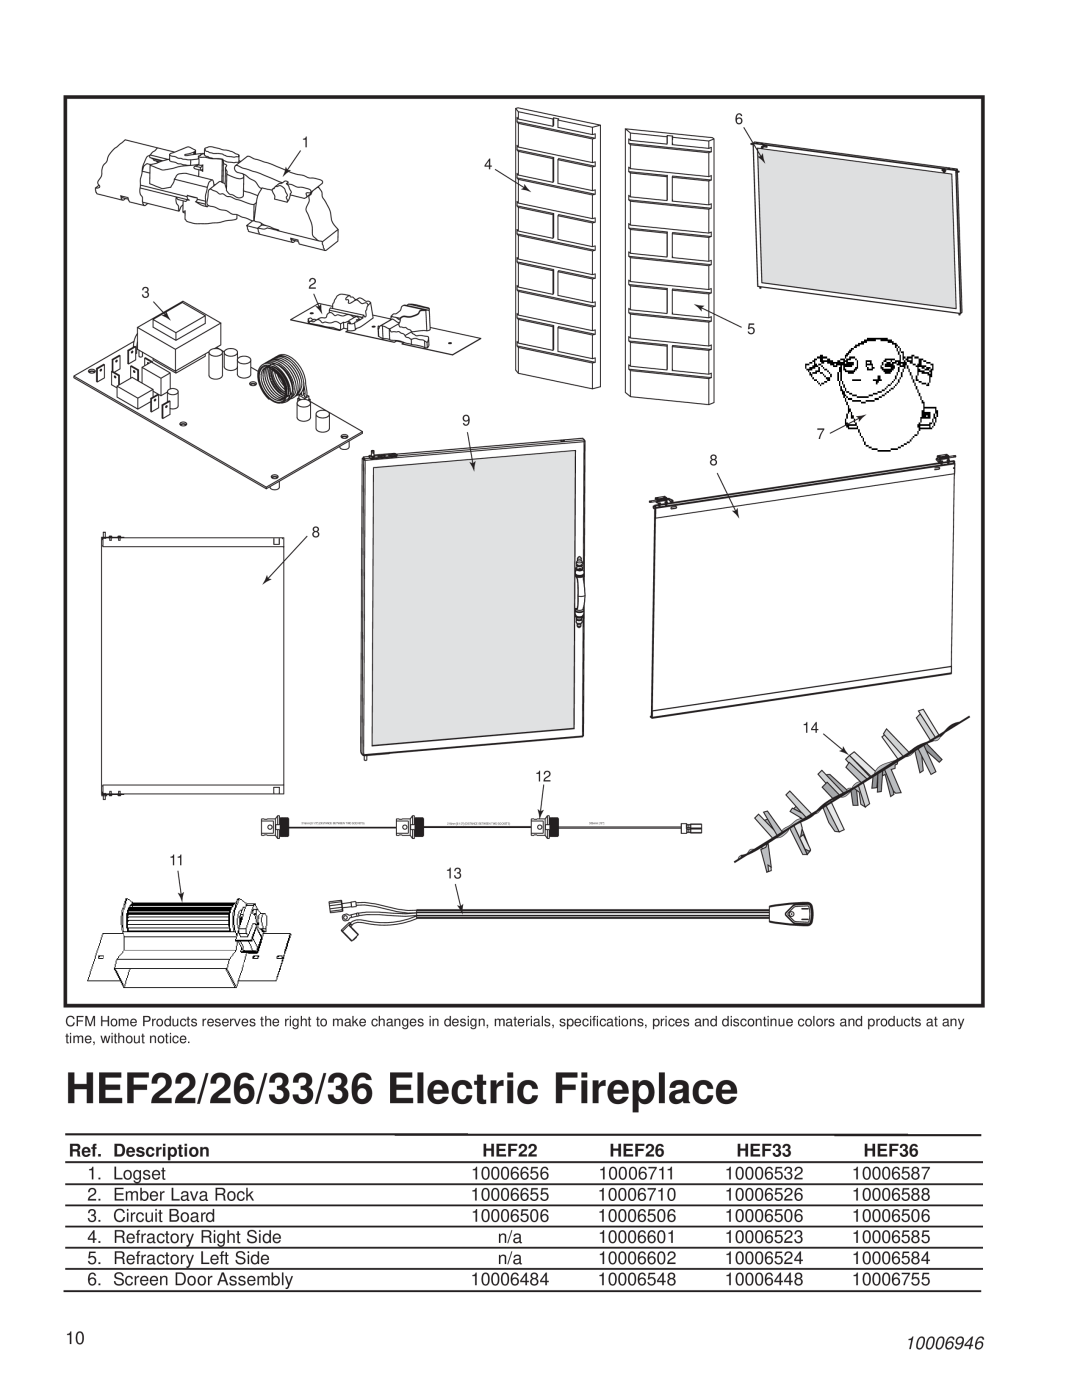 Vermont Casting HEF33 installation instructions HEF22/26/33/36 Electric Fireplace, Description, HEF26, HEF36, 10006946 